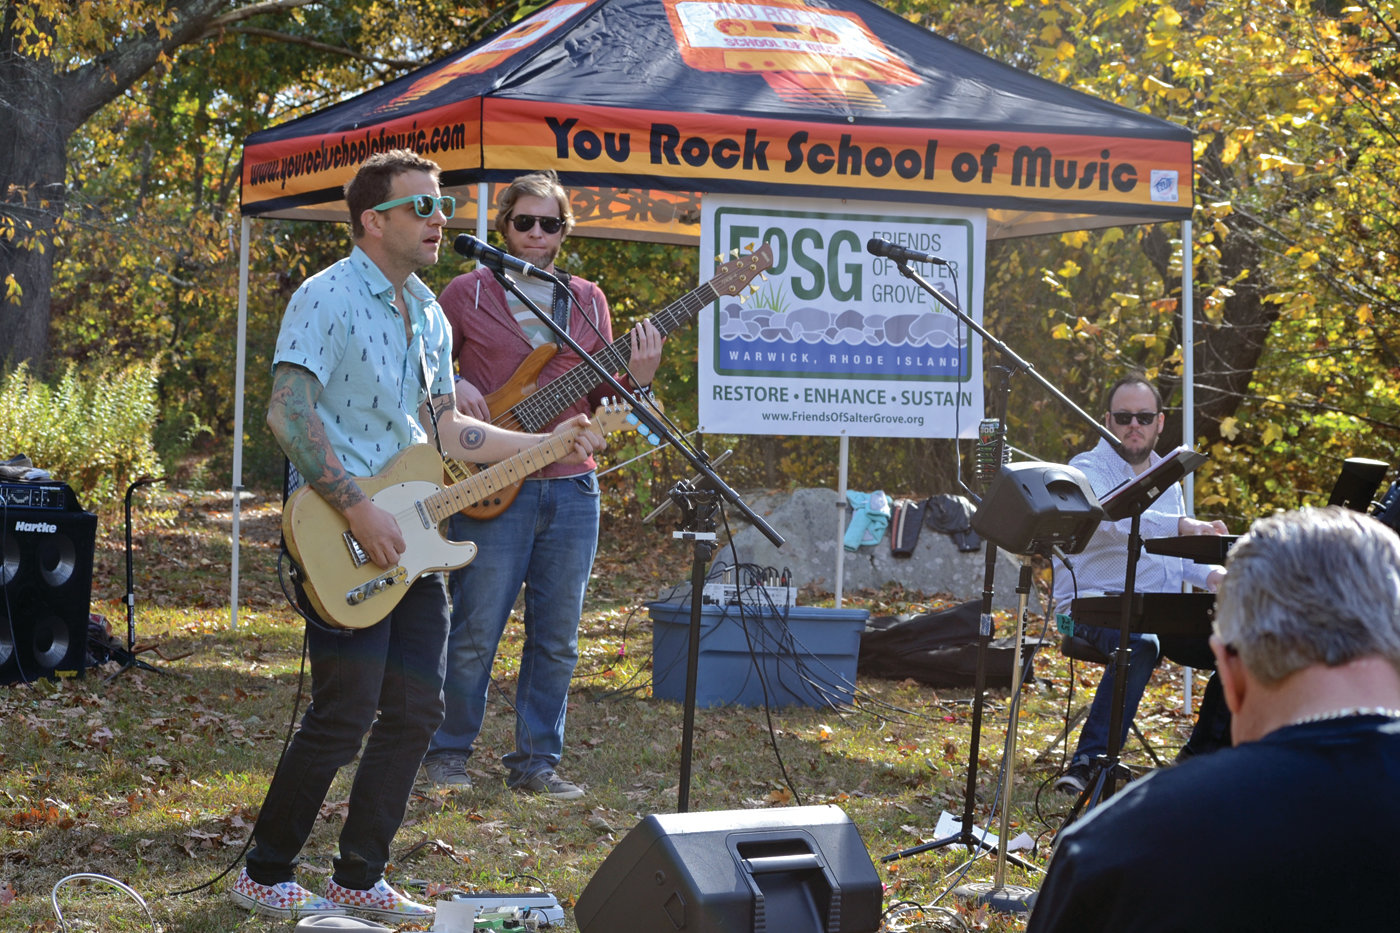 GROOVY: Salter's Groove, a Warwick-based cover band with a name derived from the love of the park, provided an array of great tunes to keep the energy lively. Pictured is guitarist/vocalist Sean P. Rogan, Evan "GoodSmash" Gilroy on bass guitar and vocals and Peter "Mister" SanGiovanni on drums and vocals. Michael "Fever" Cordeiro is on keyboard.